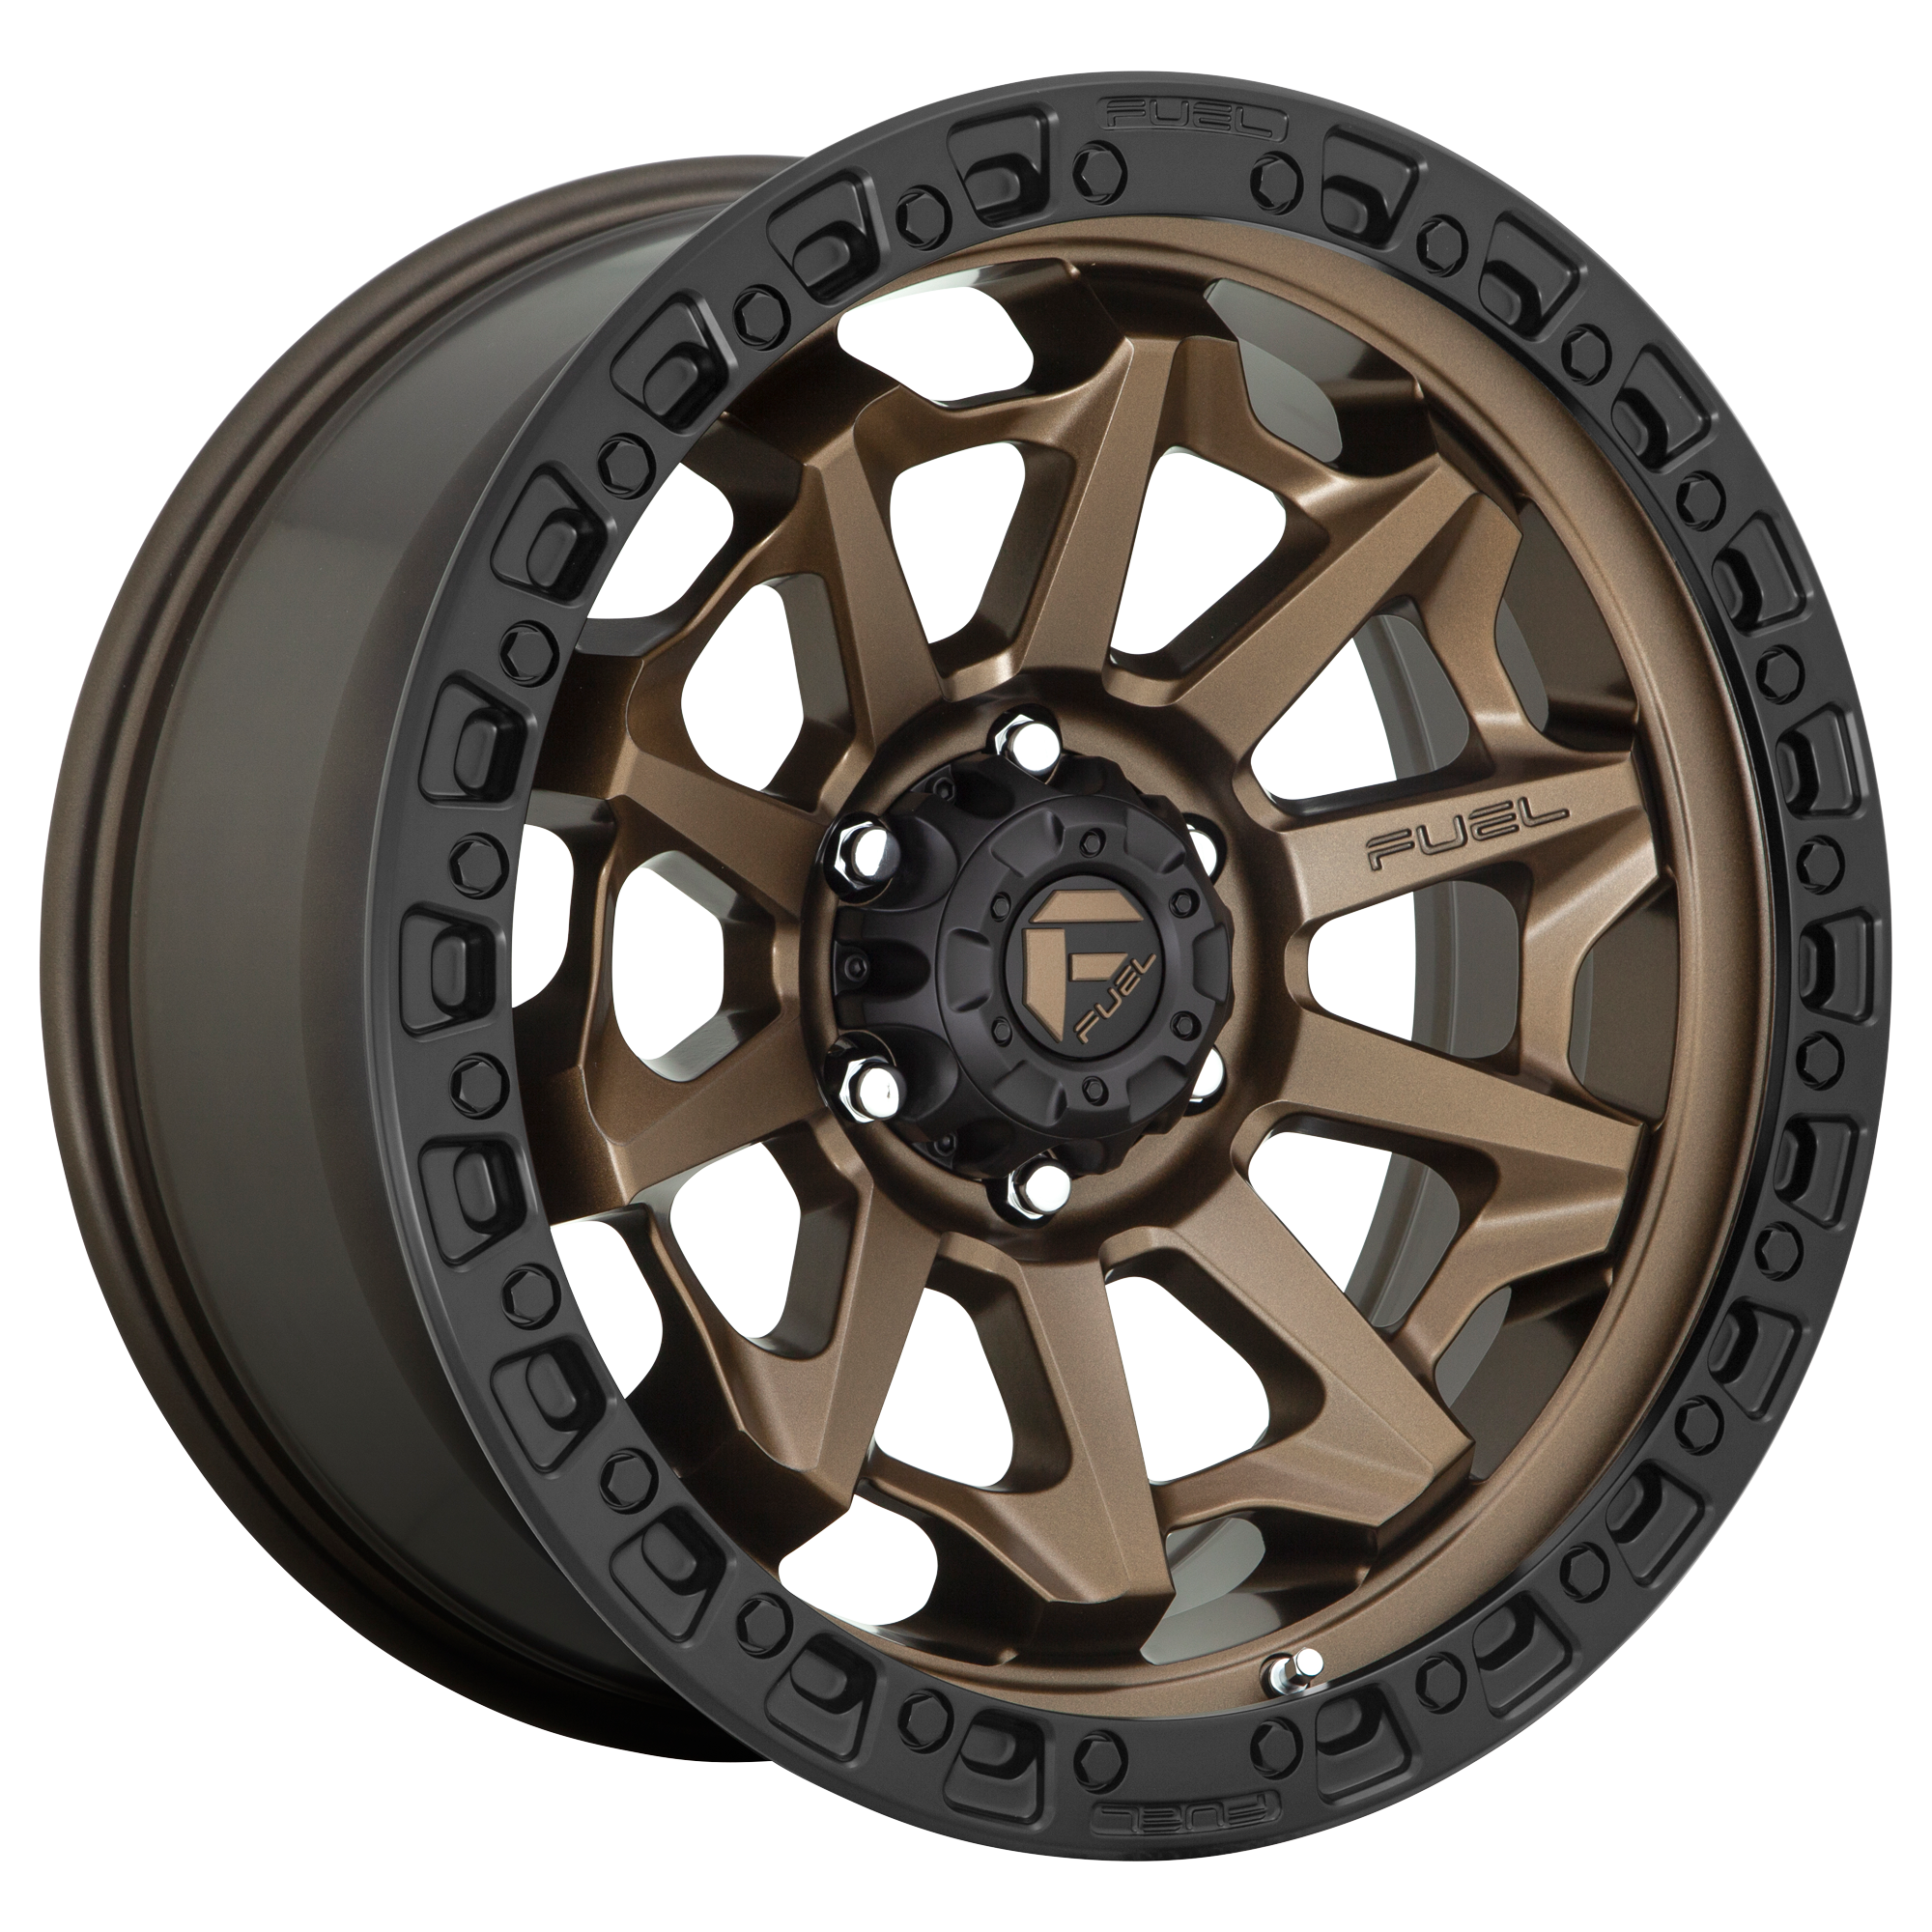 COVERT 20x9 5x127.00 MATTE BRONZE BLACK BEAD RING (20 mm) - Tires and Engine Performance